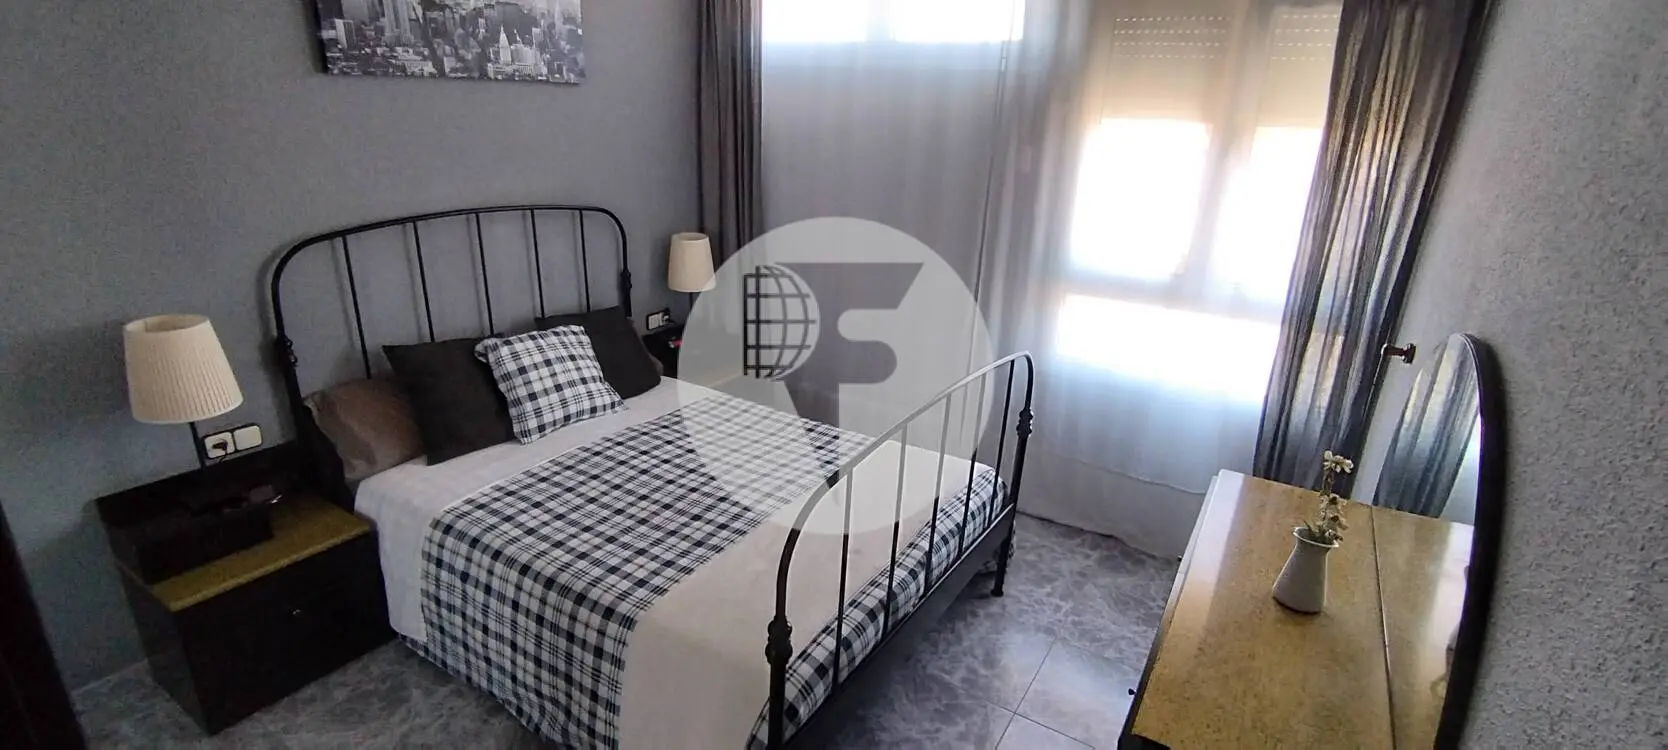 Charming 107m² flat with views and parking in Santa Eulalia de Ronçana 8